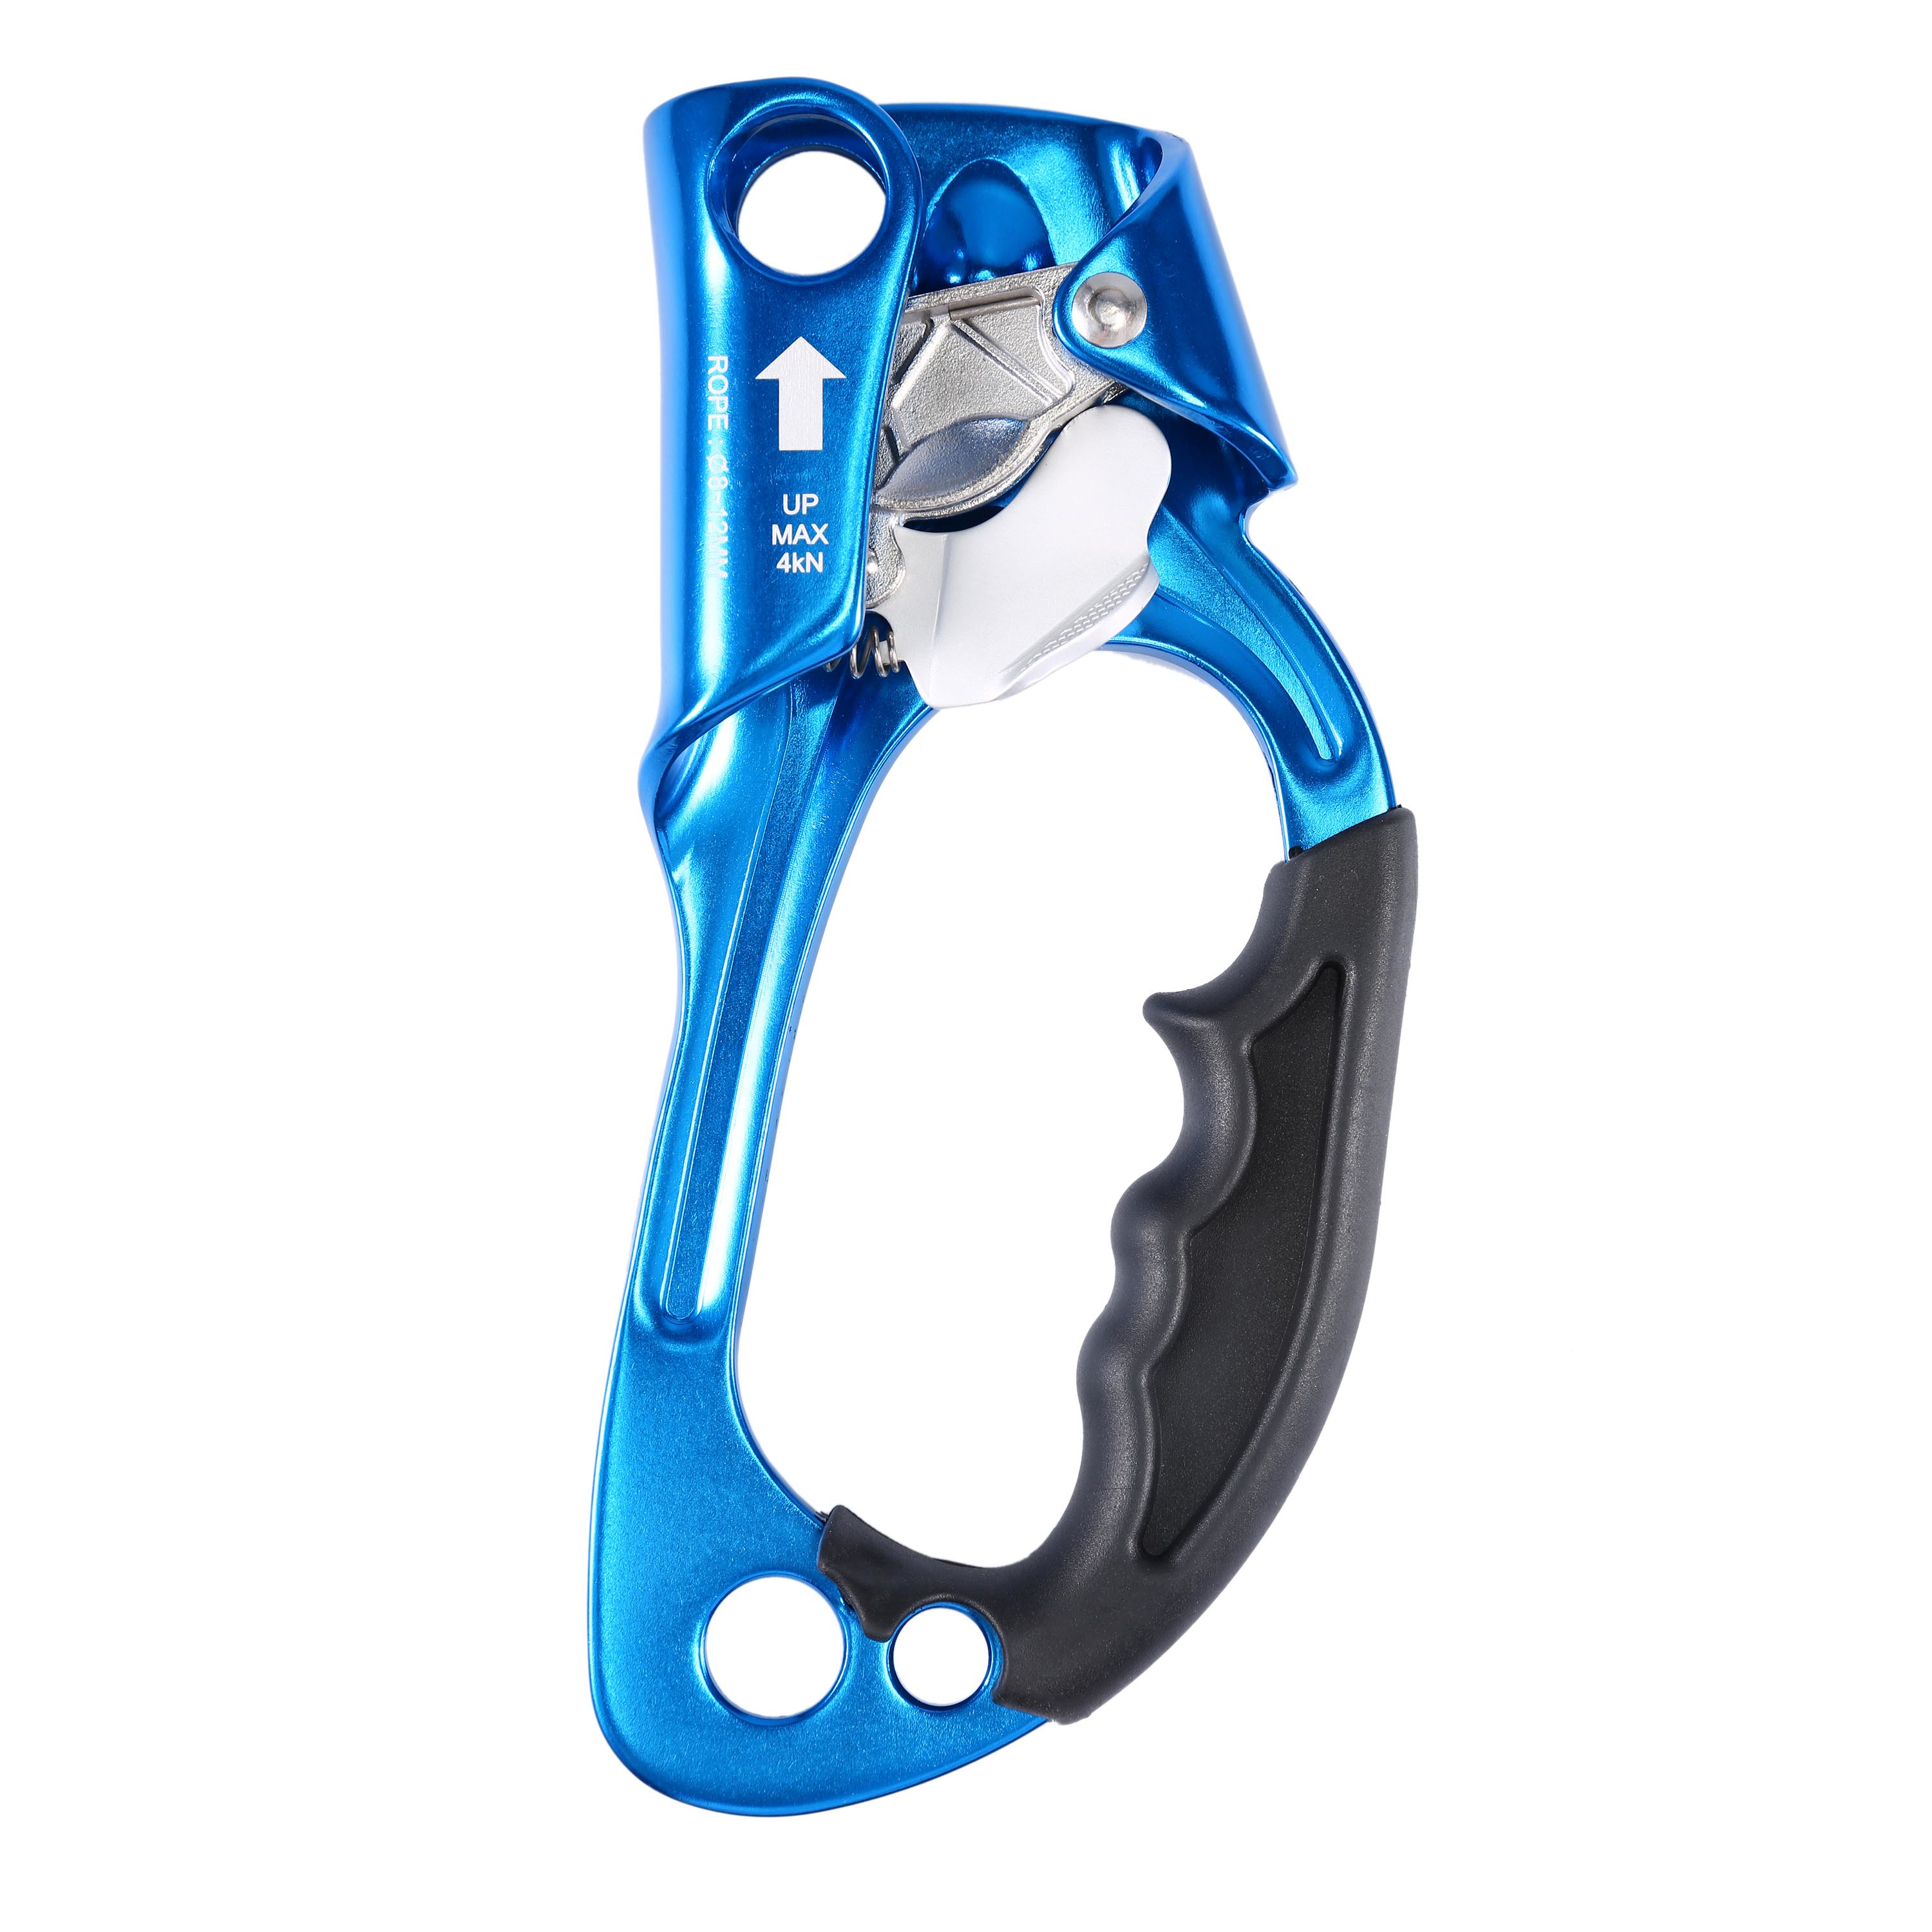 Details about   Outdoor Rocky Climbing Hand Ascender for Sport Climber for 9-12MM Rope 